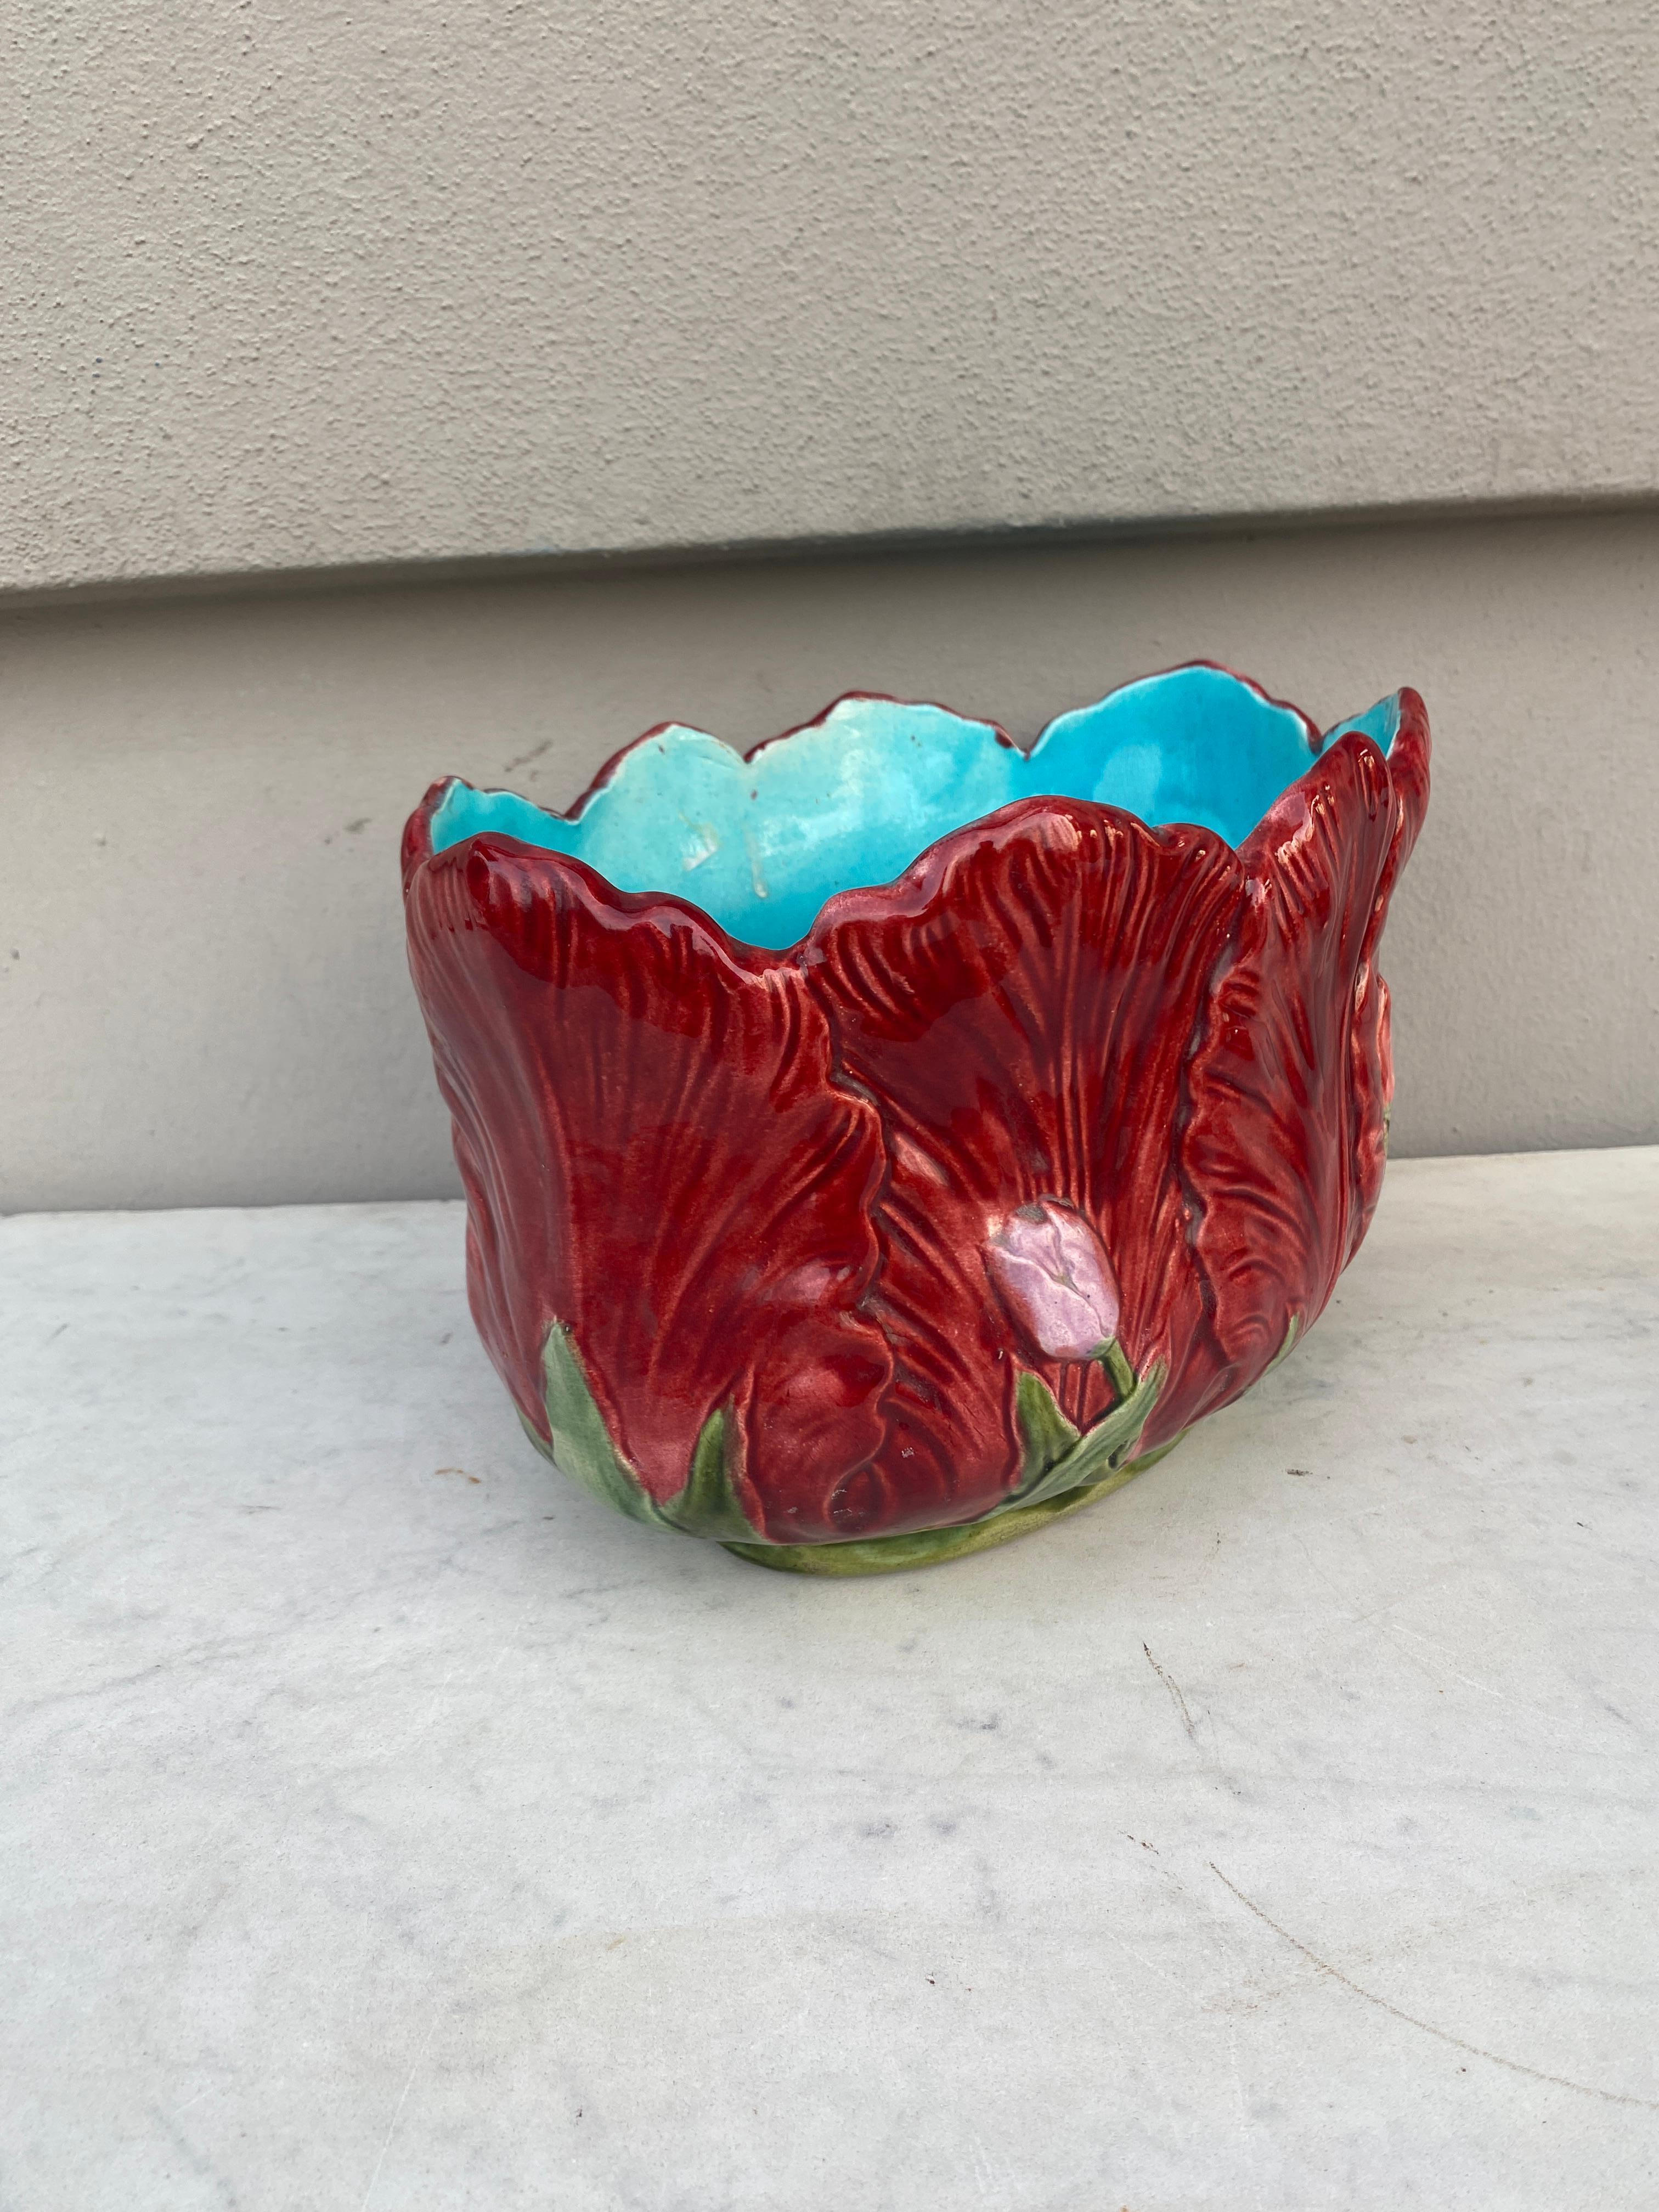 19th century French Majolica Red Tulip Jardiniere.
North of France.